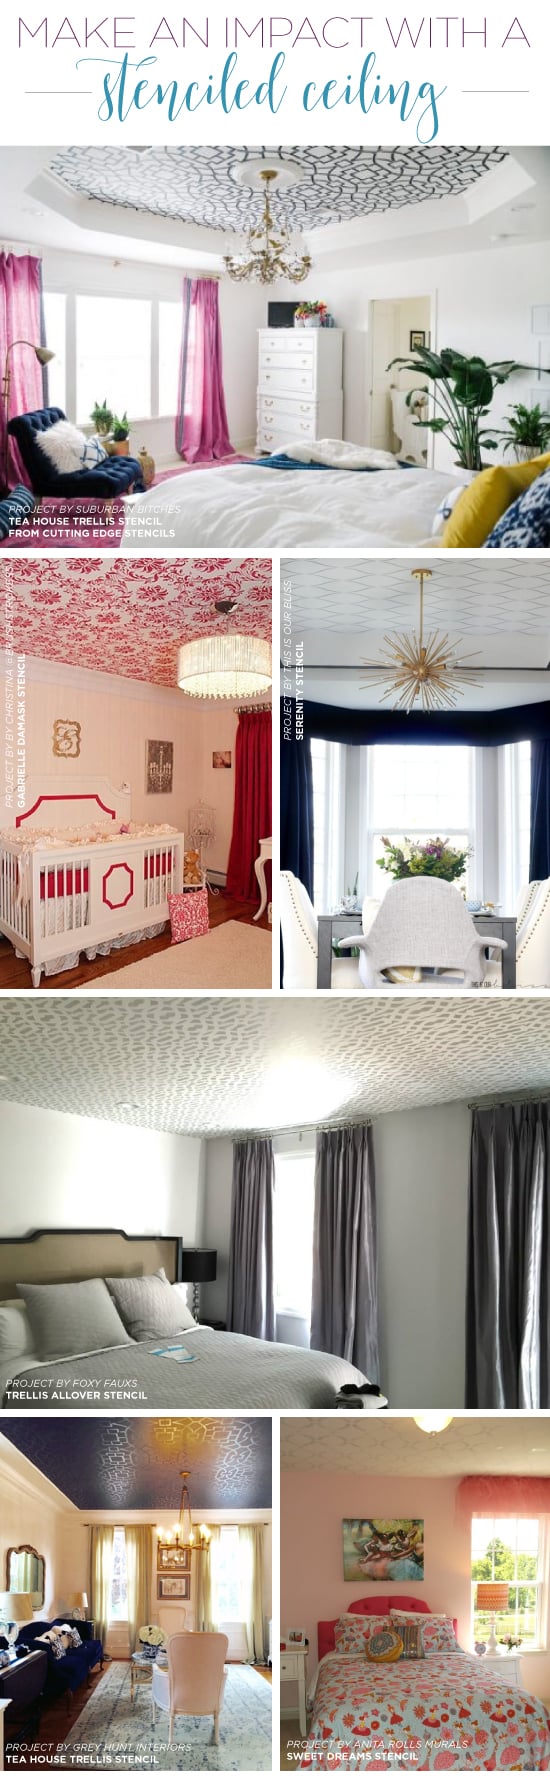 Cutting Edge Stencils shares how stencil patterns can give a boring ceiling presence and style. http://www.cuttingedgestencils.com/wall-stencils-stencil-designs.html